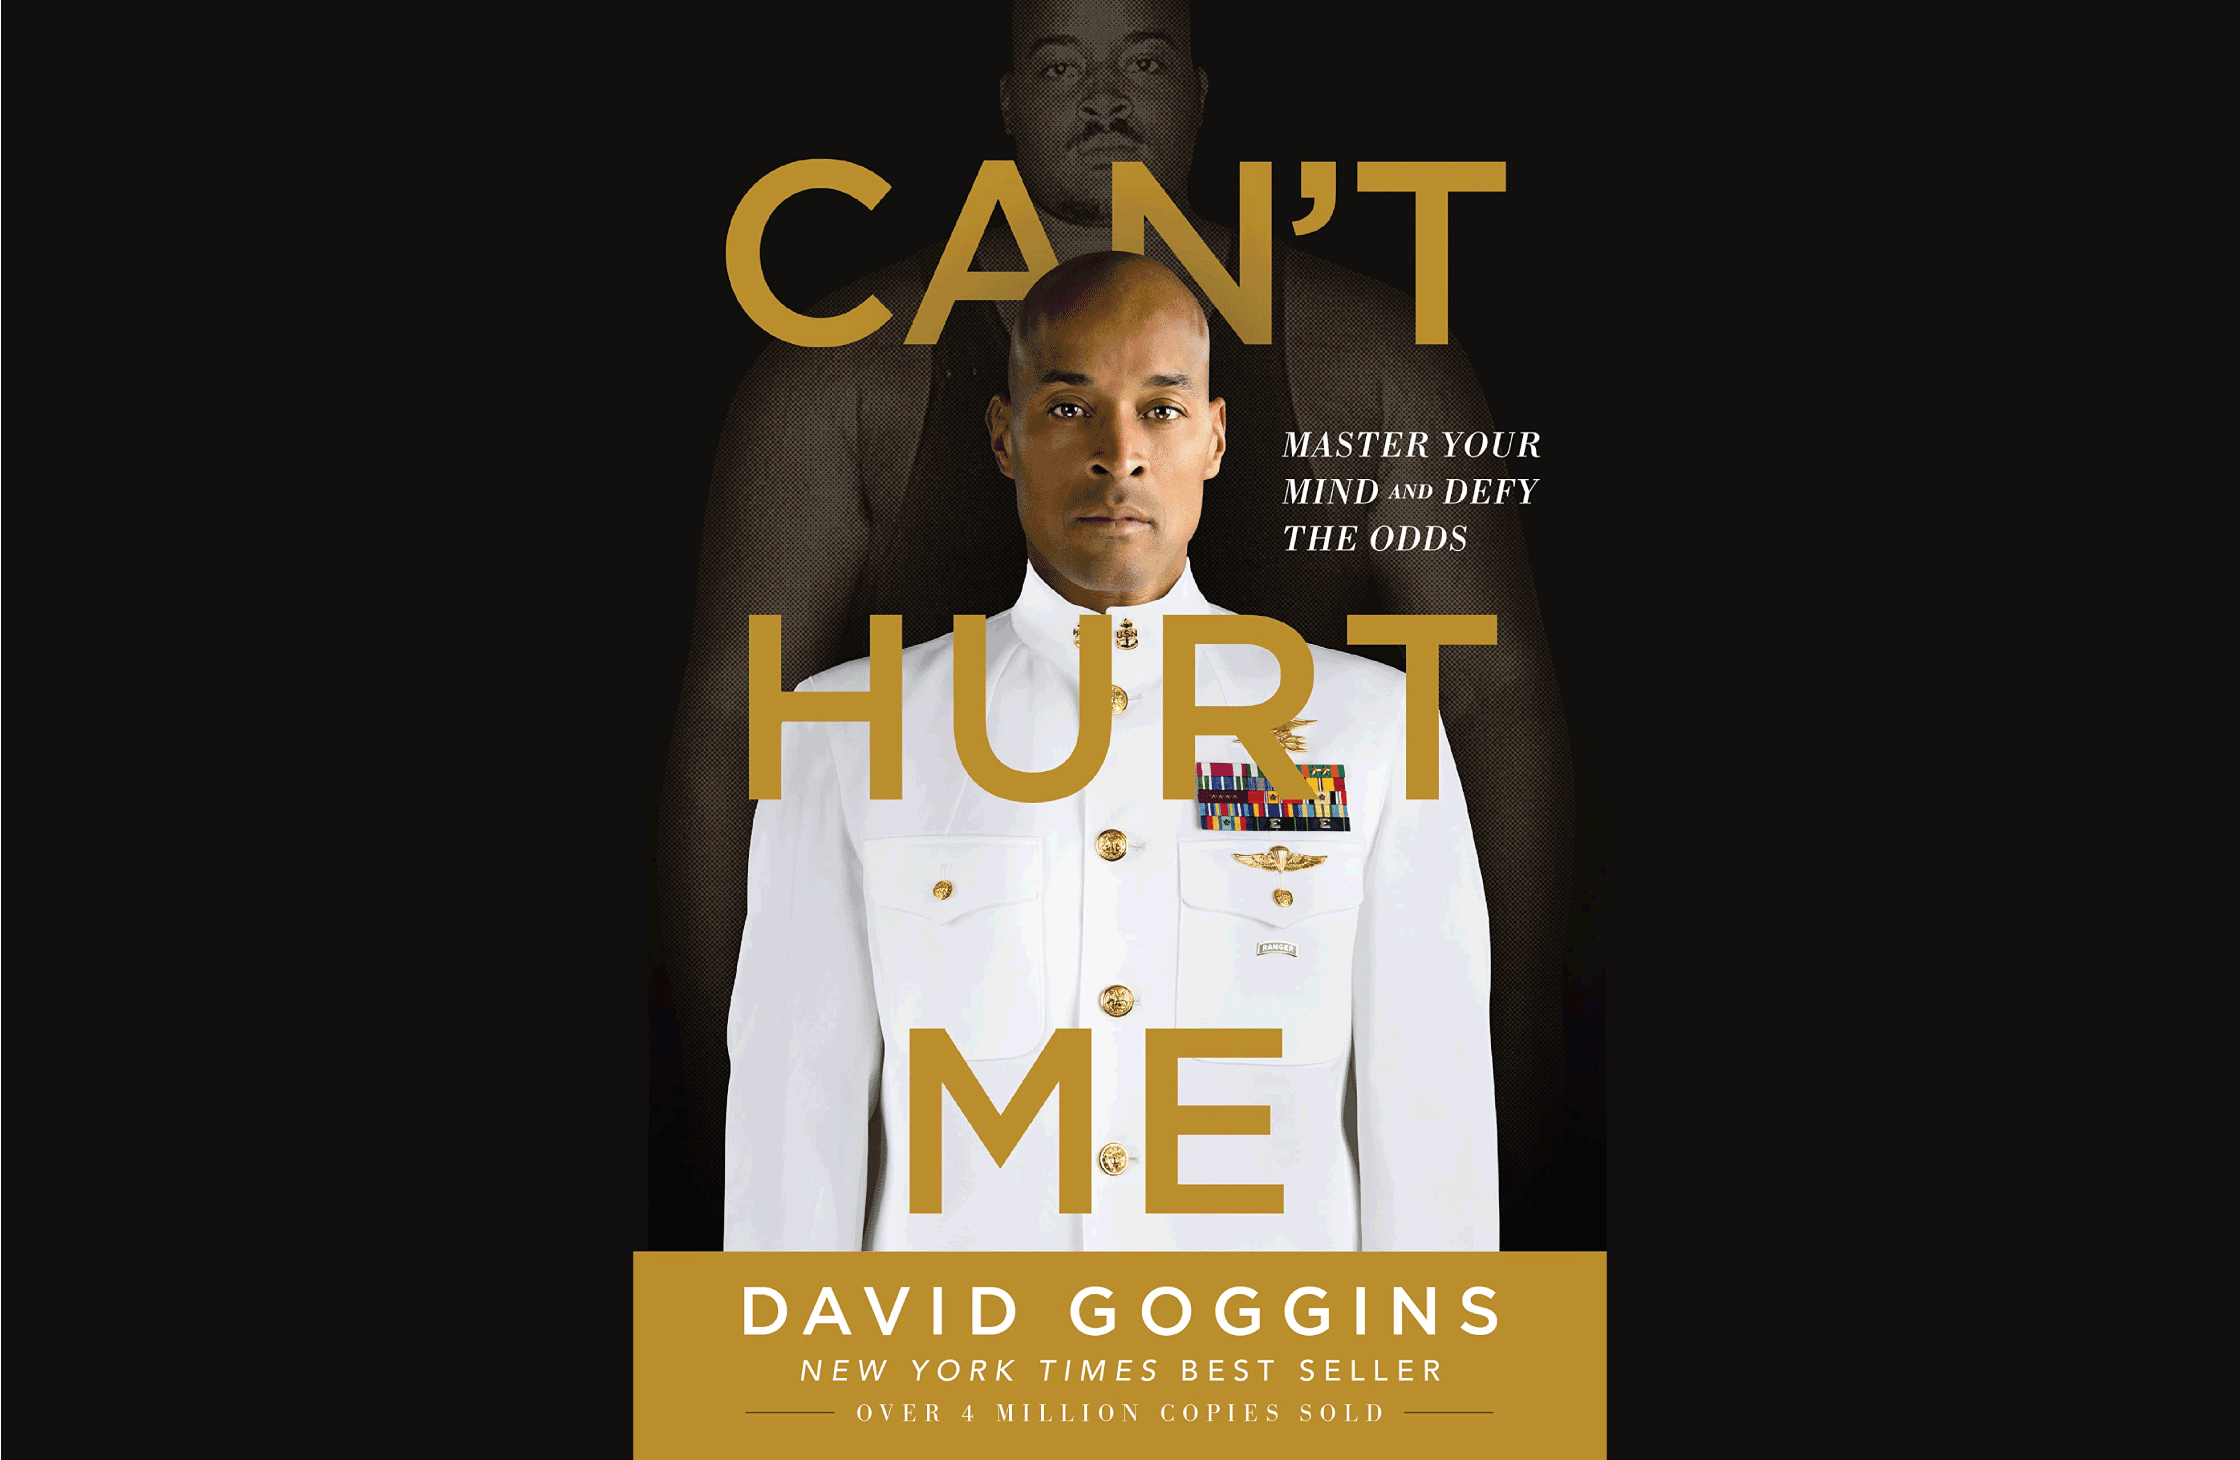 Unleash Your Inner Grit: Lessons from 'Can't Hurt Me' by David Goggins